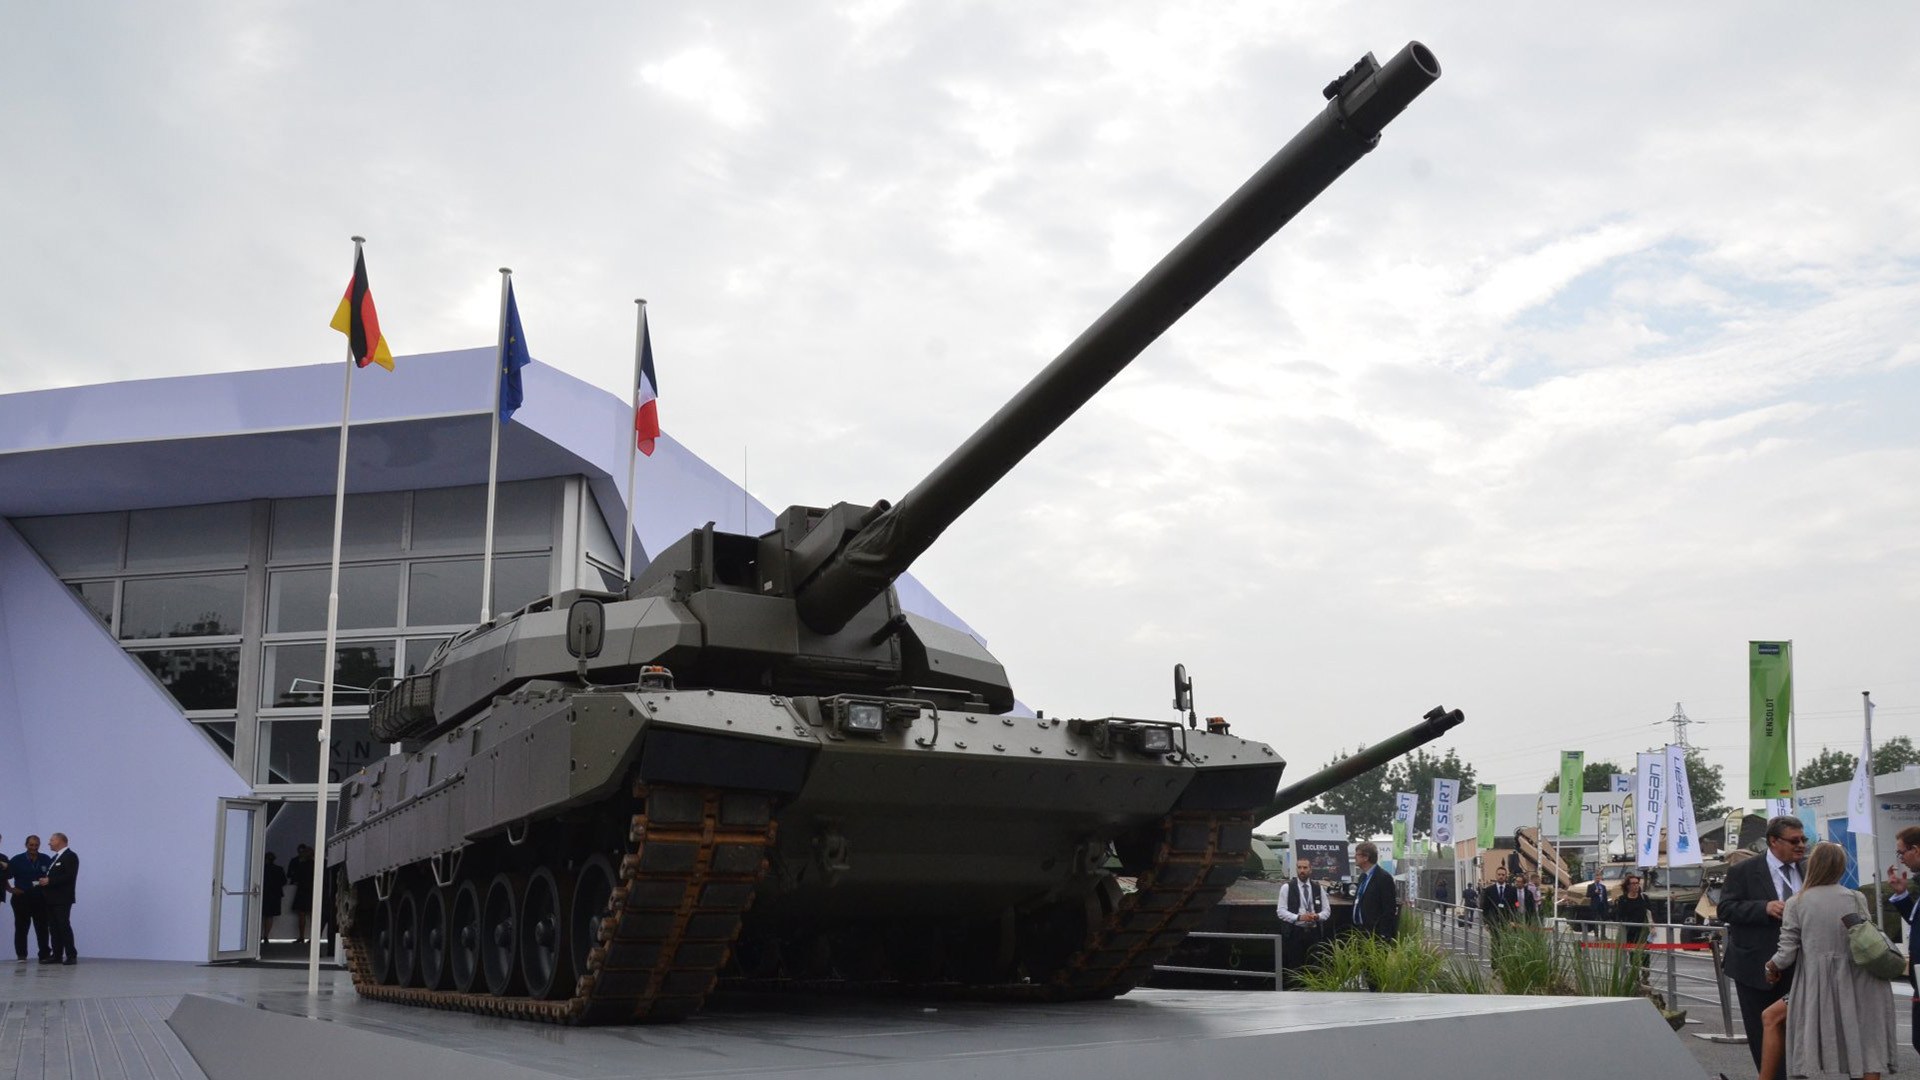 Franco-German defence company, KMW+Nexter Defense Systems (KNDS) unveiled a new Euro Main Battle Tank (EMBT) concept at the ongoing Eurosatory 2018 exhibition at the Paris-Nord Villepinte Exhibition Centre in Paris, France.